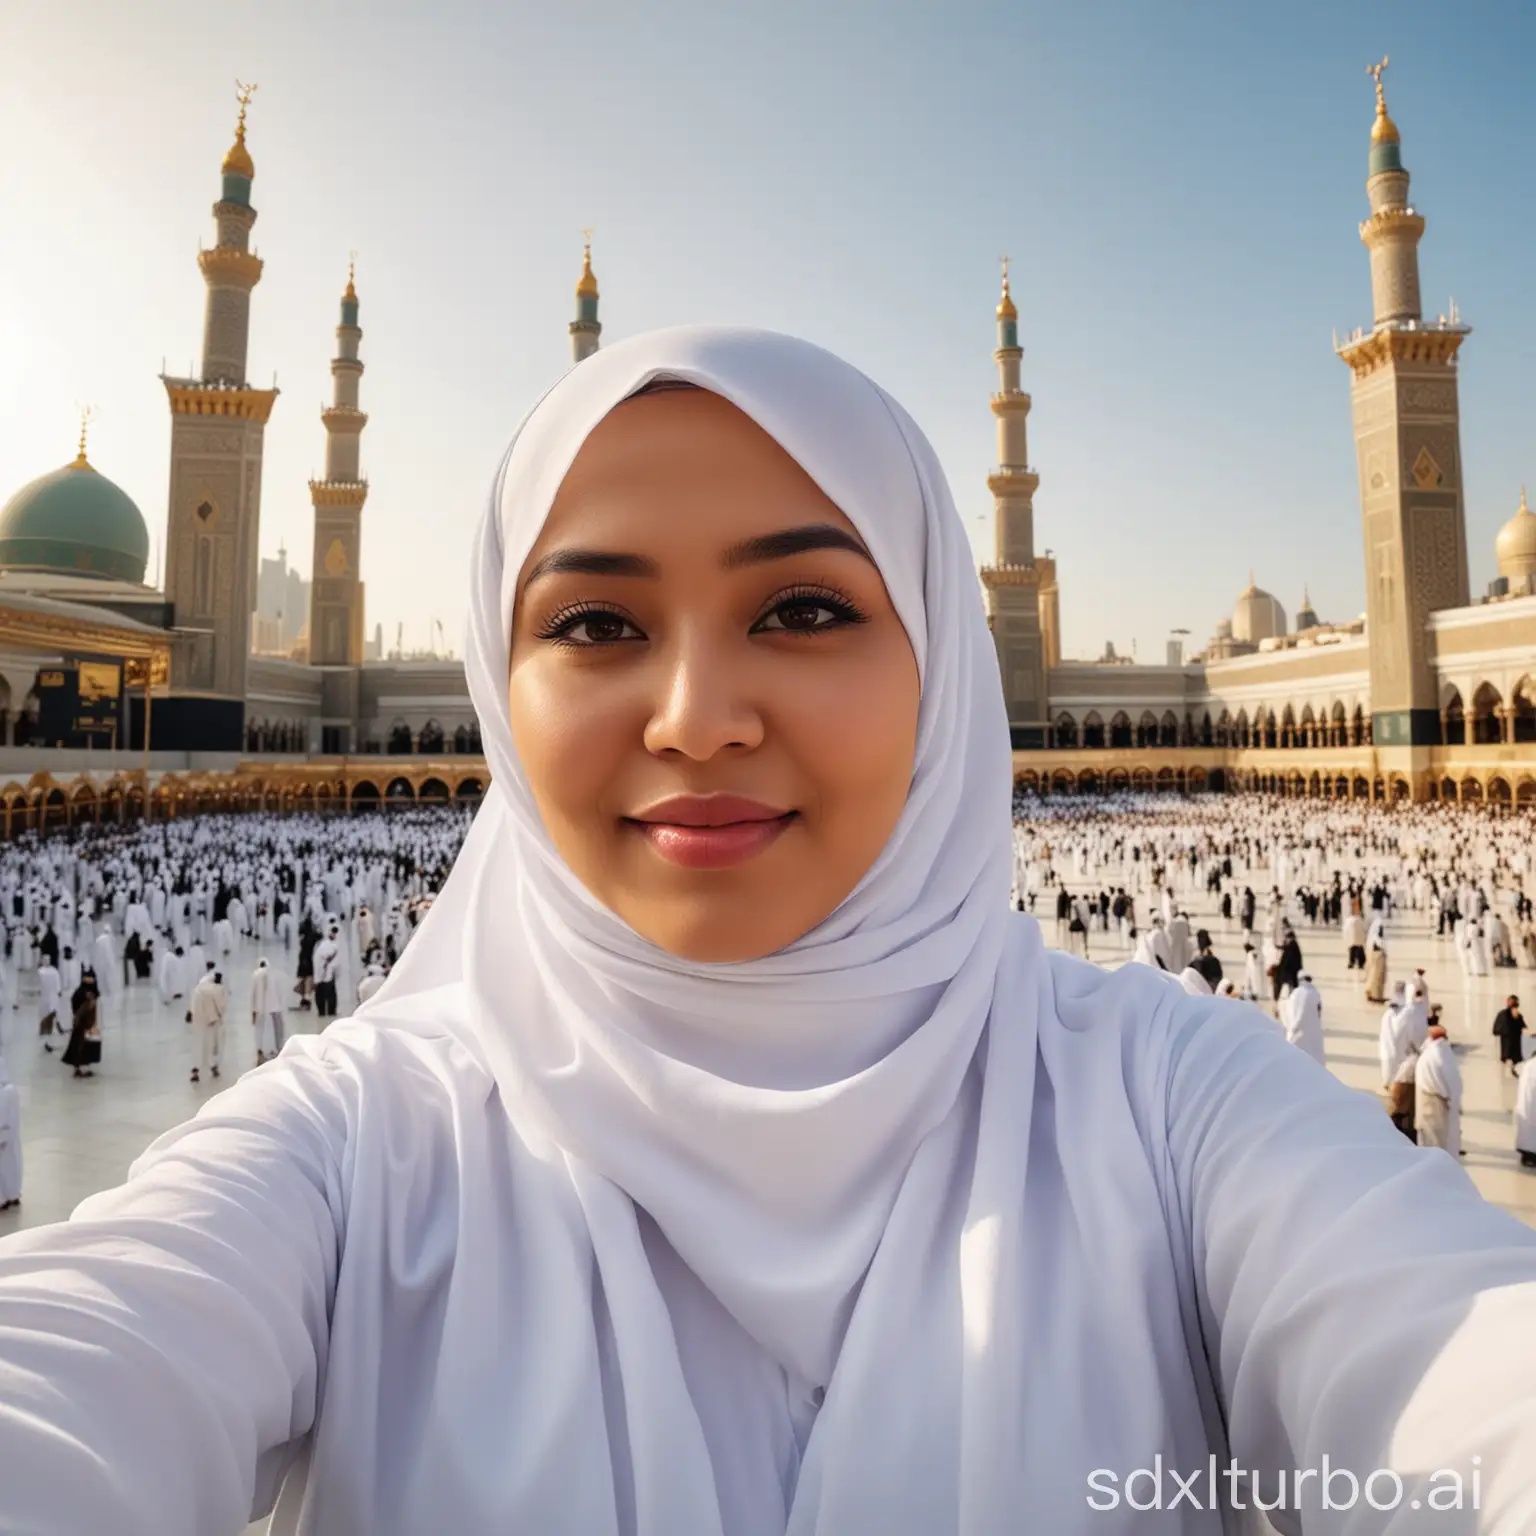 Chubby-Indonesian-Woman-in-White-Hijab-Taking-Selfie-with-Kaaba-Background